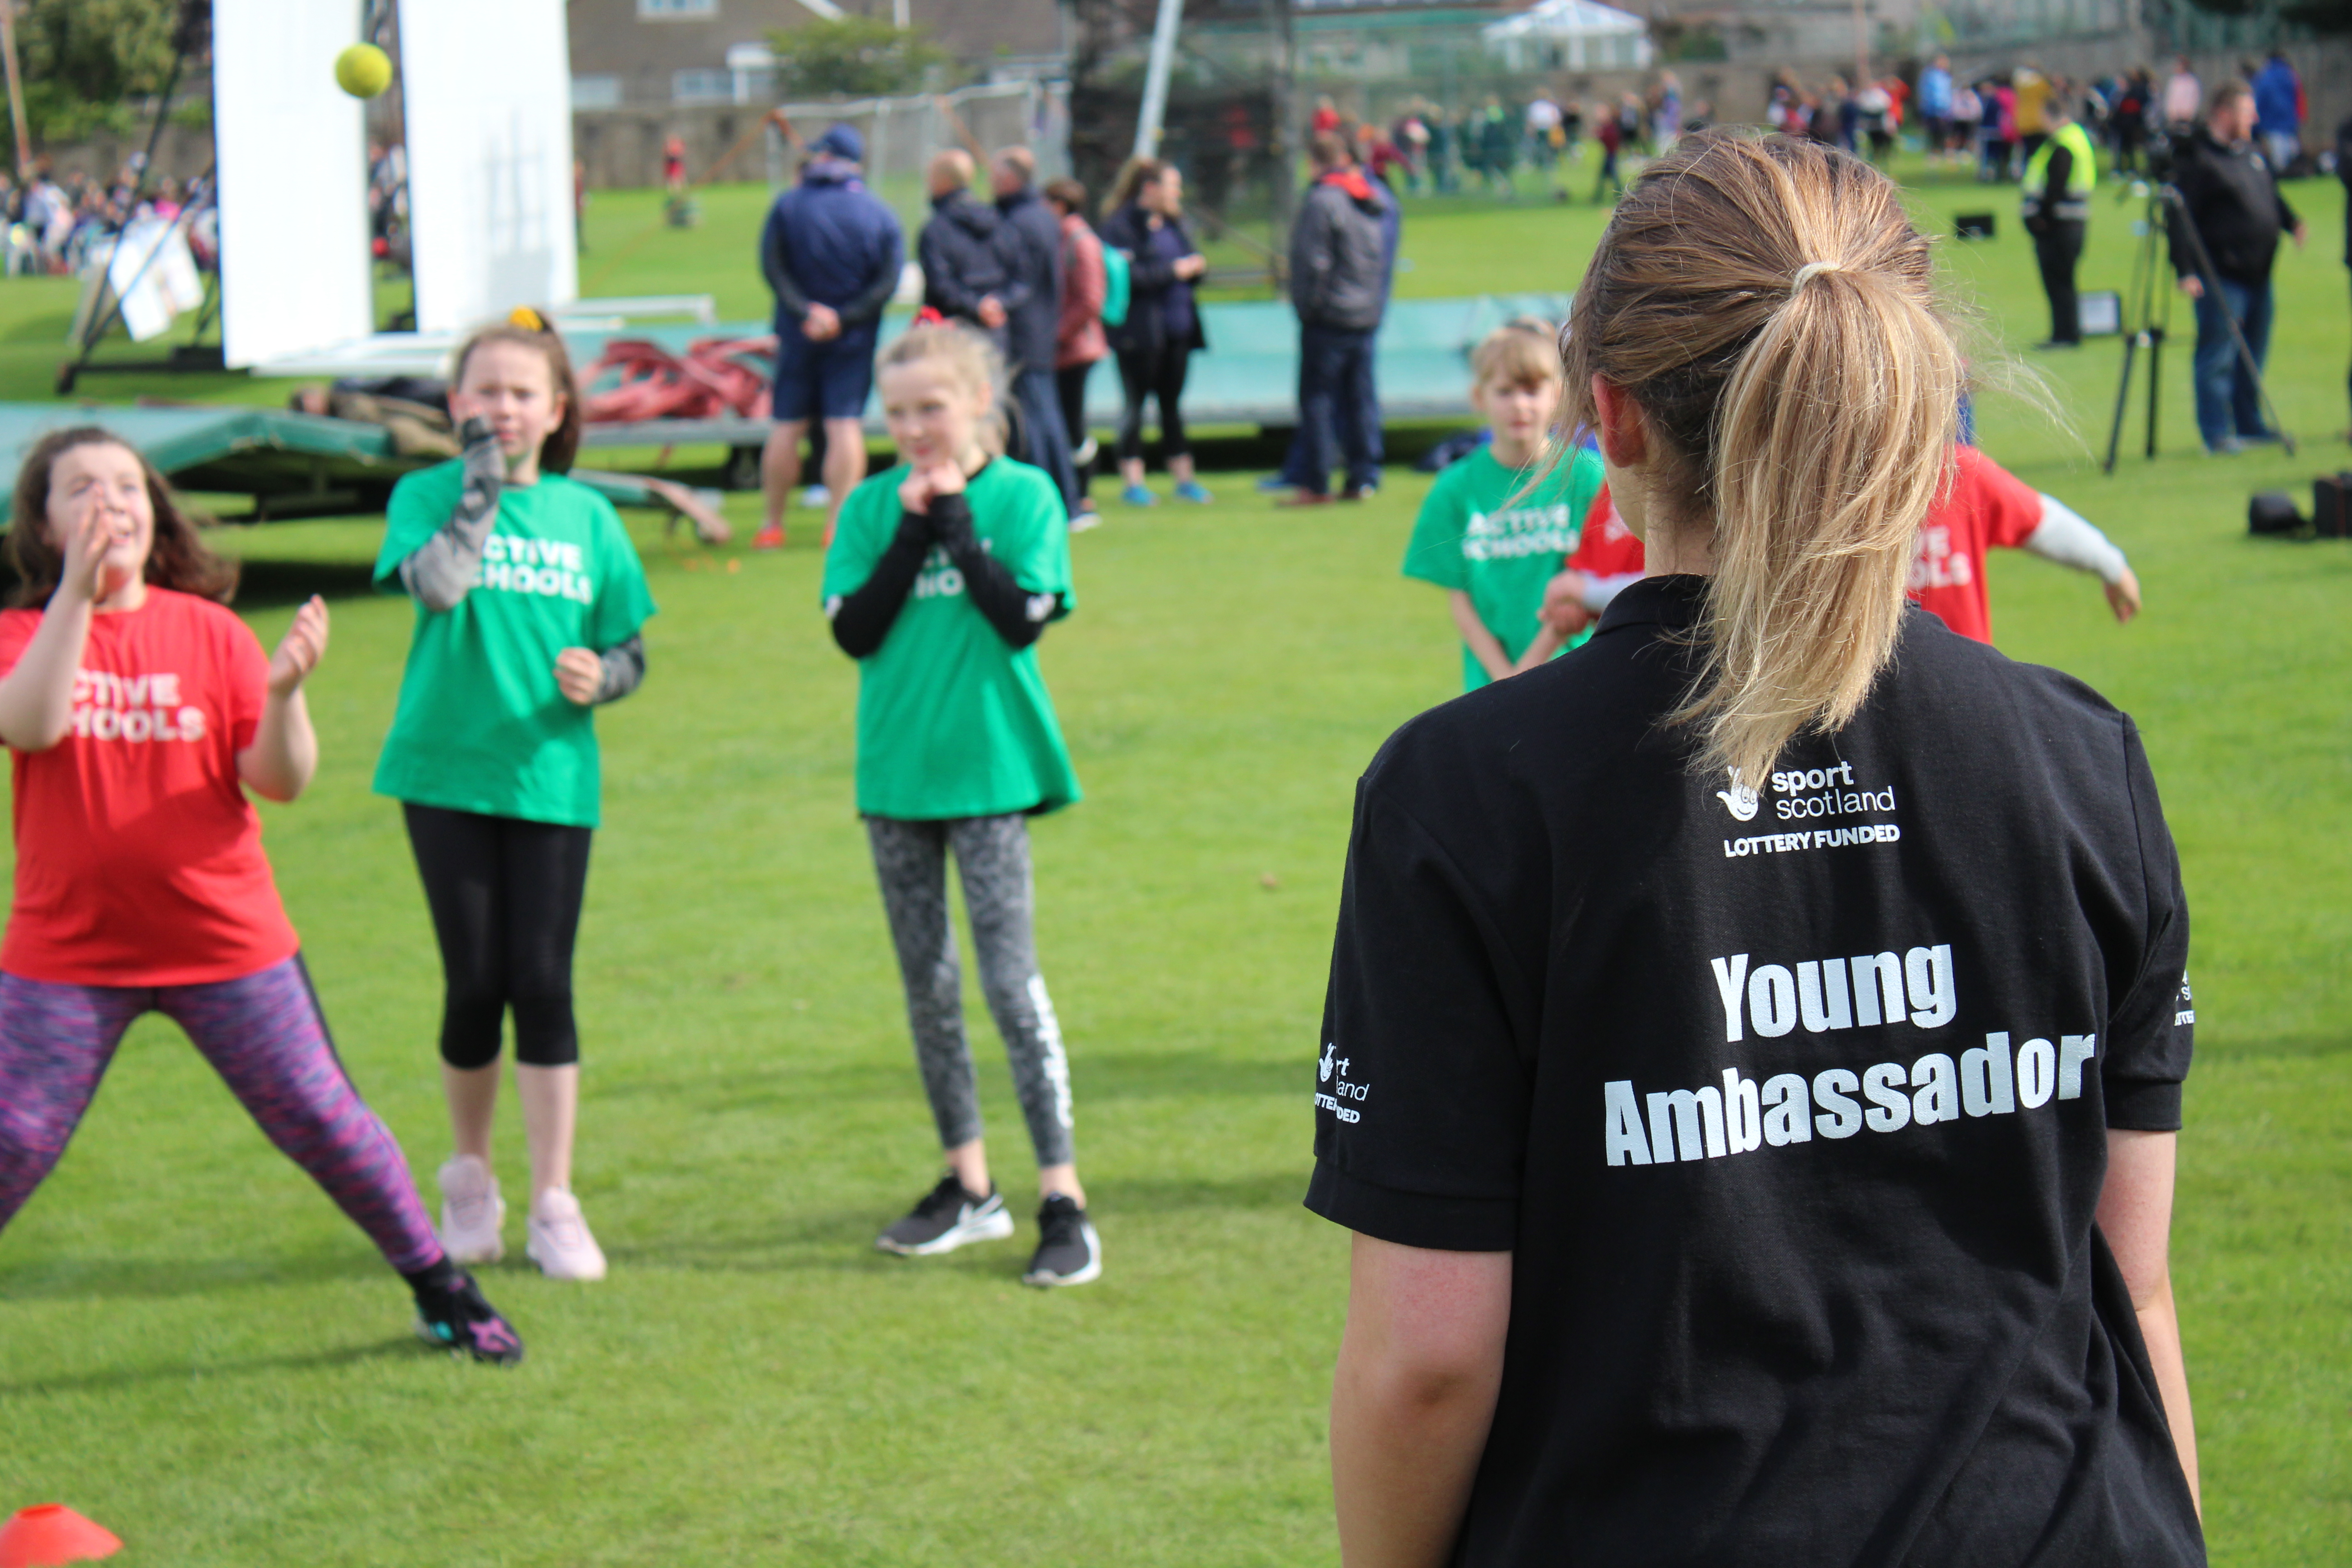 From behind, Young Ambassador, with kids in background